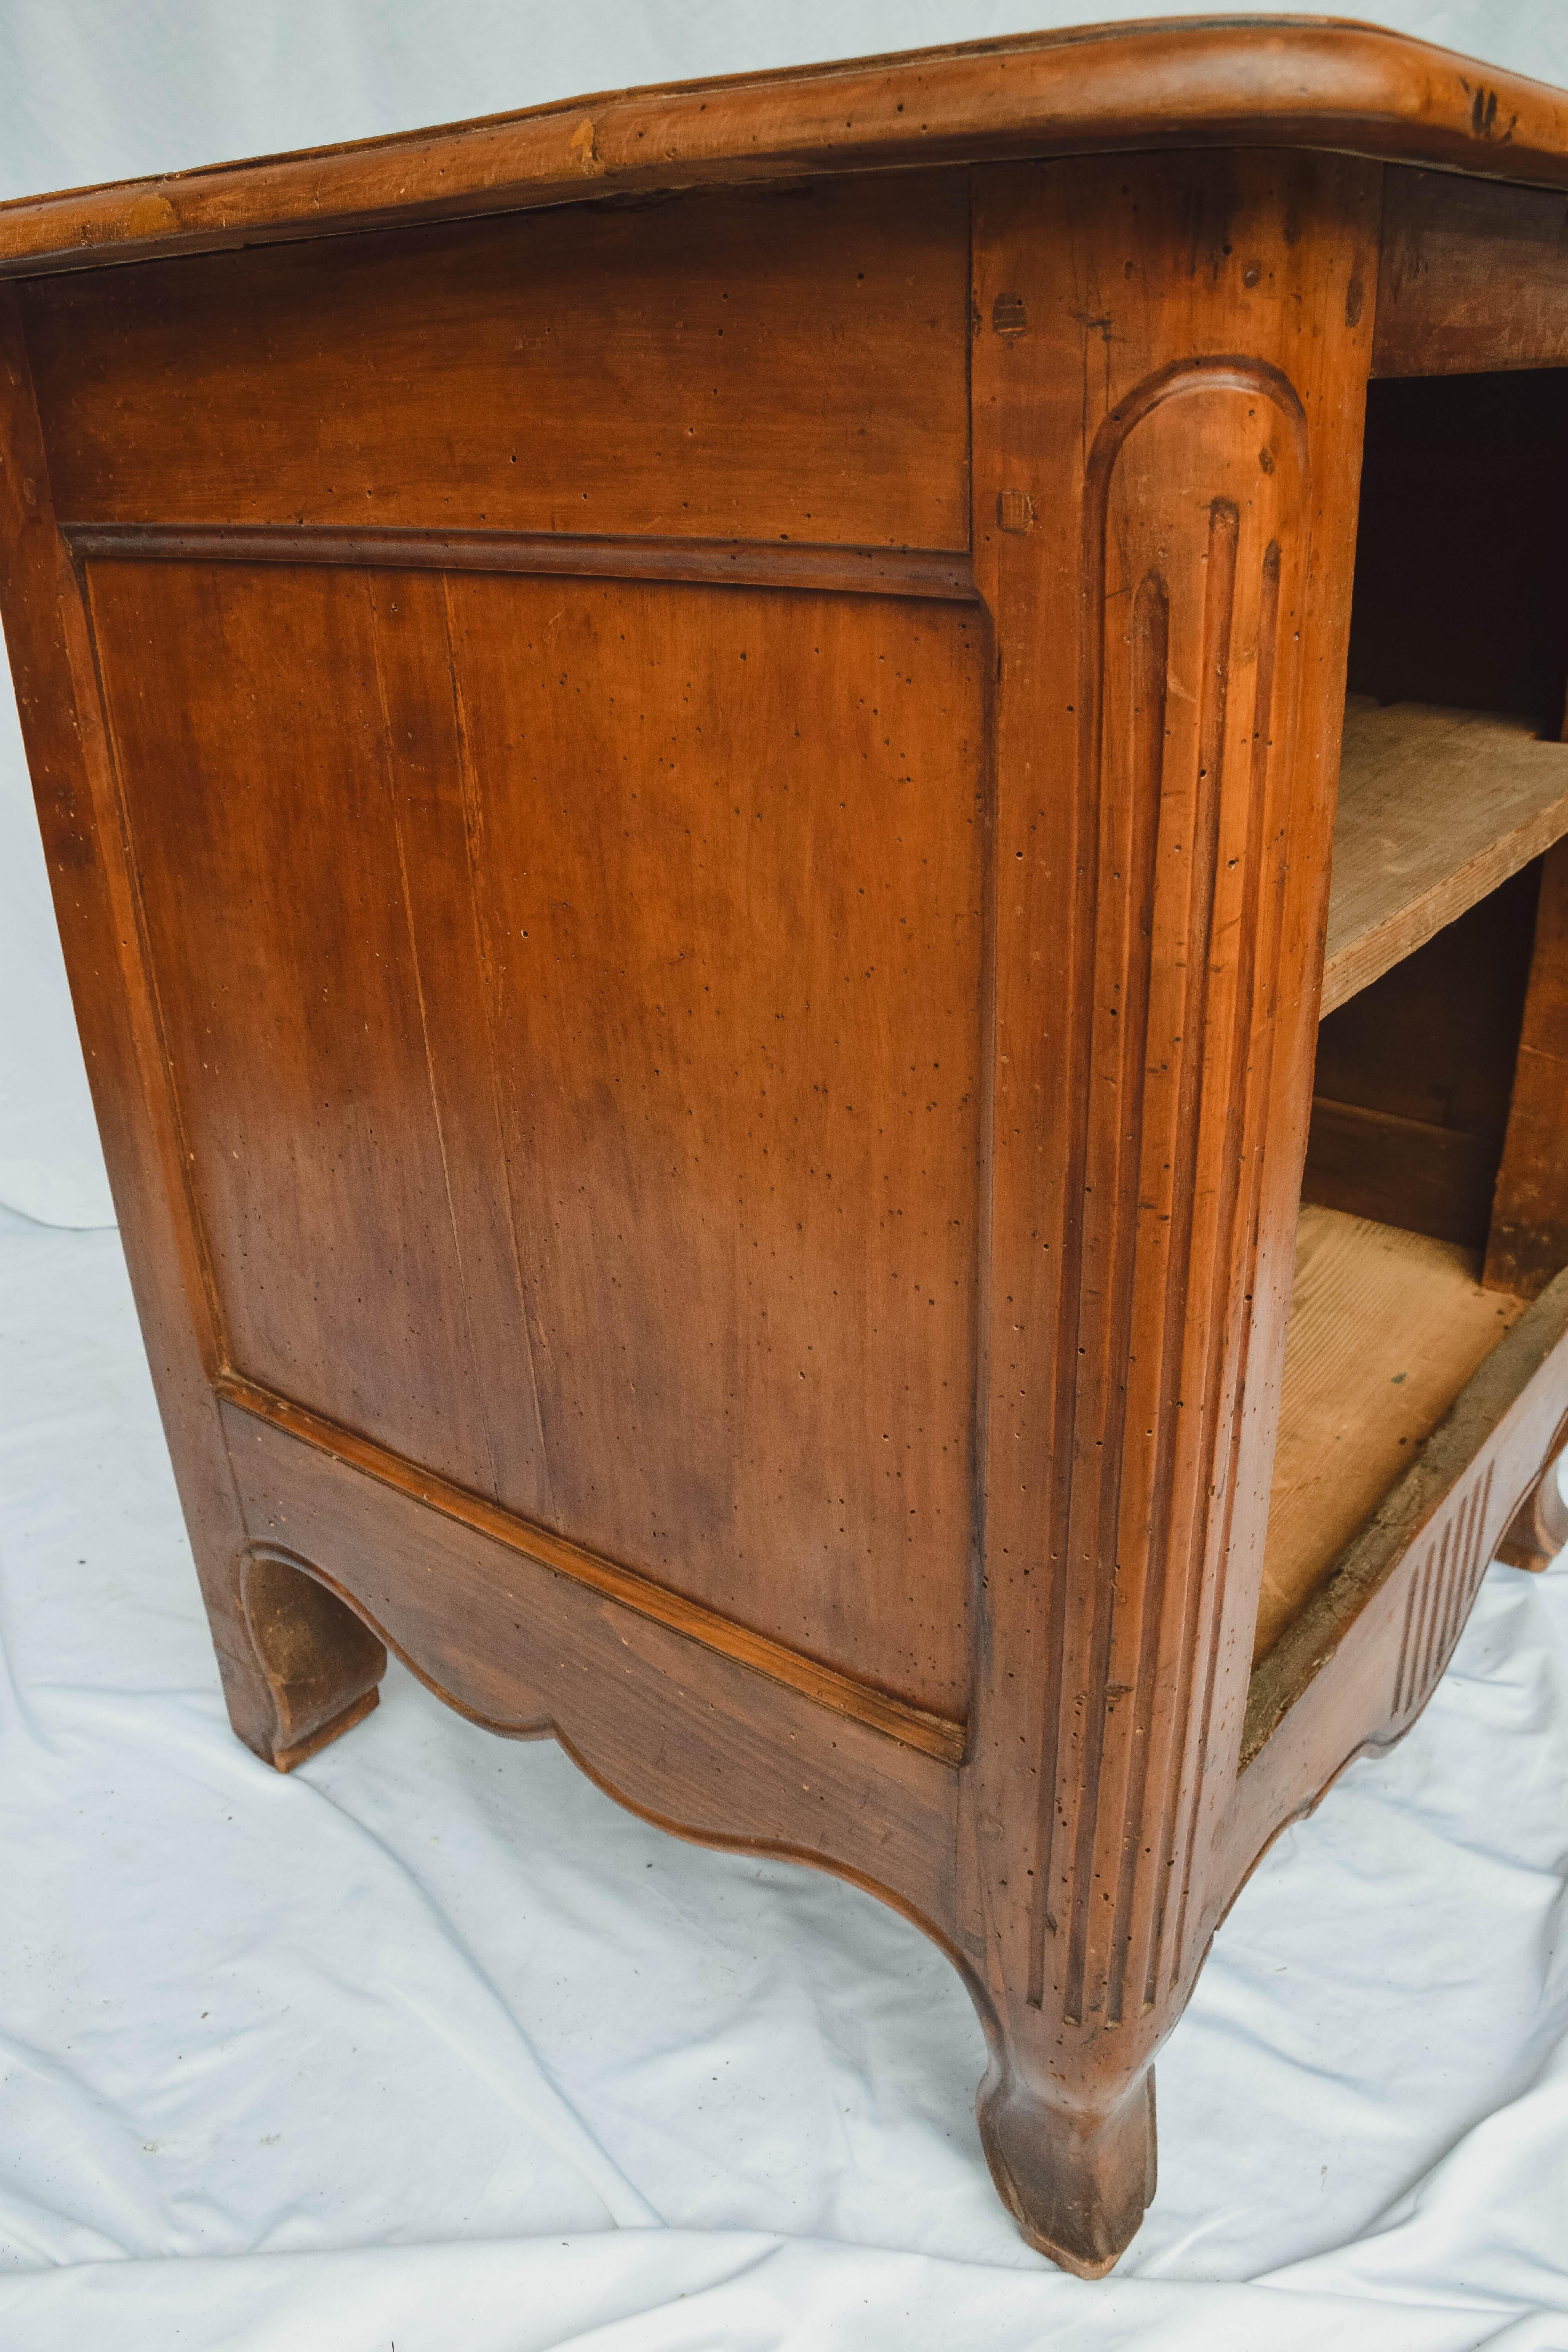 We found this 19th century French walnut confiturier cupboard with working lock and key and decorative escutcheon in Provence. The confiturier, which was originally used for storing jambs, confit, confectioneries and more, features a single door